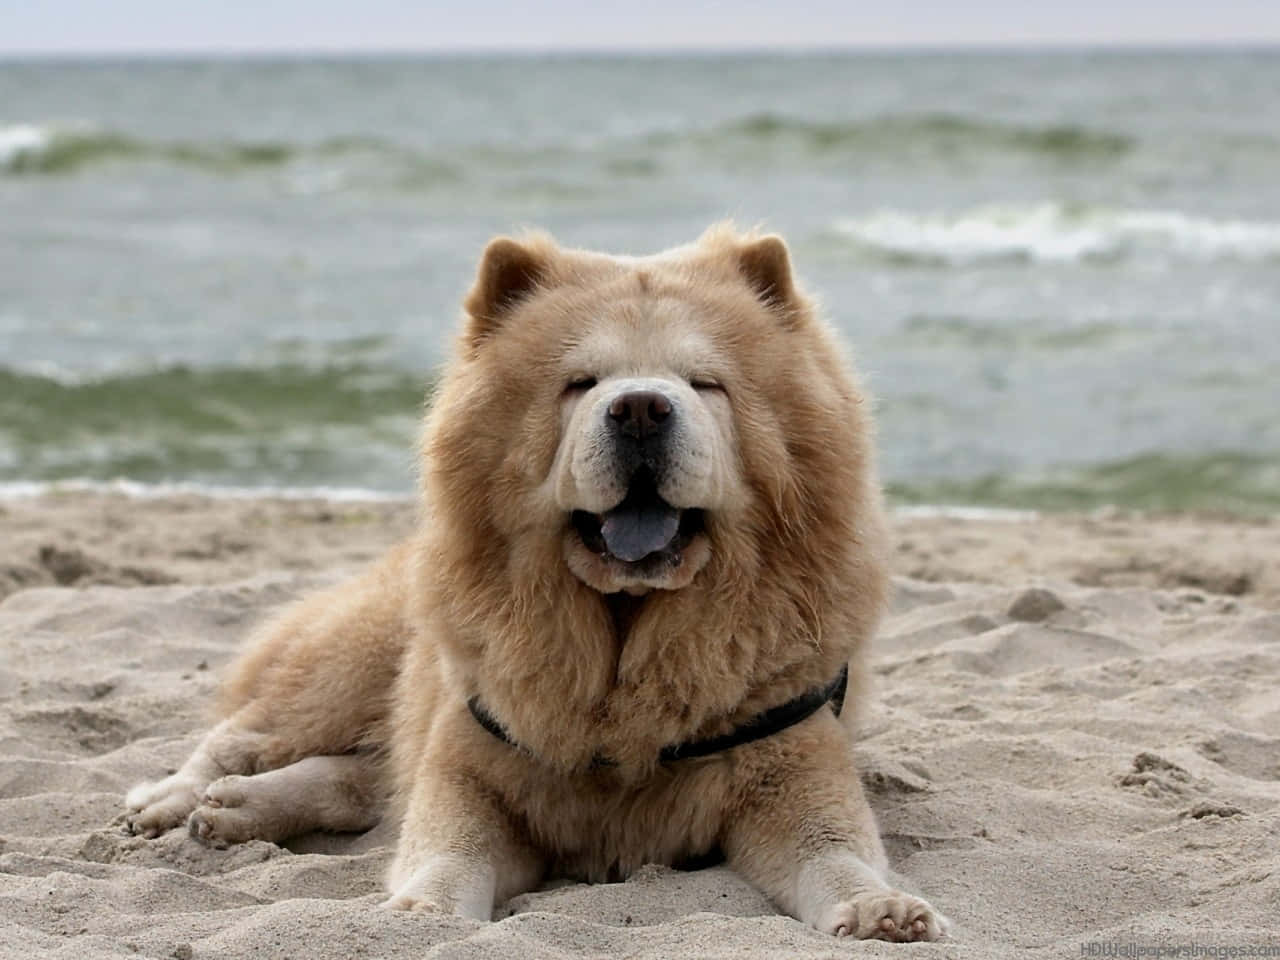 "Fluffy and Adorable - Meet the Chow Chow!"